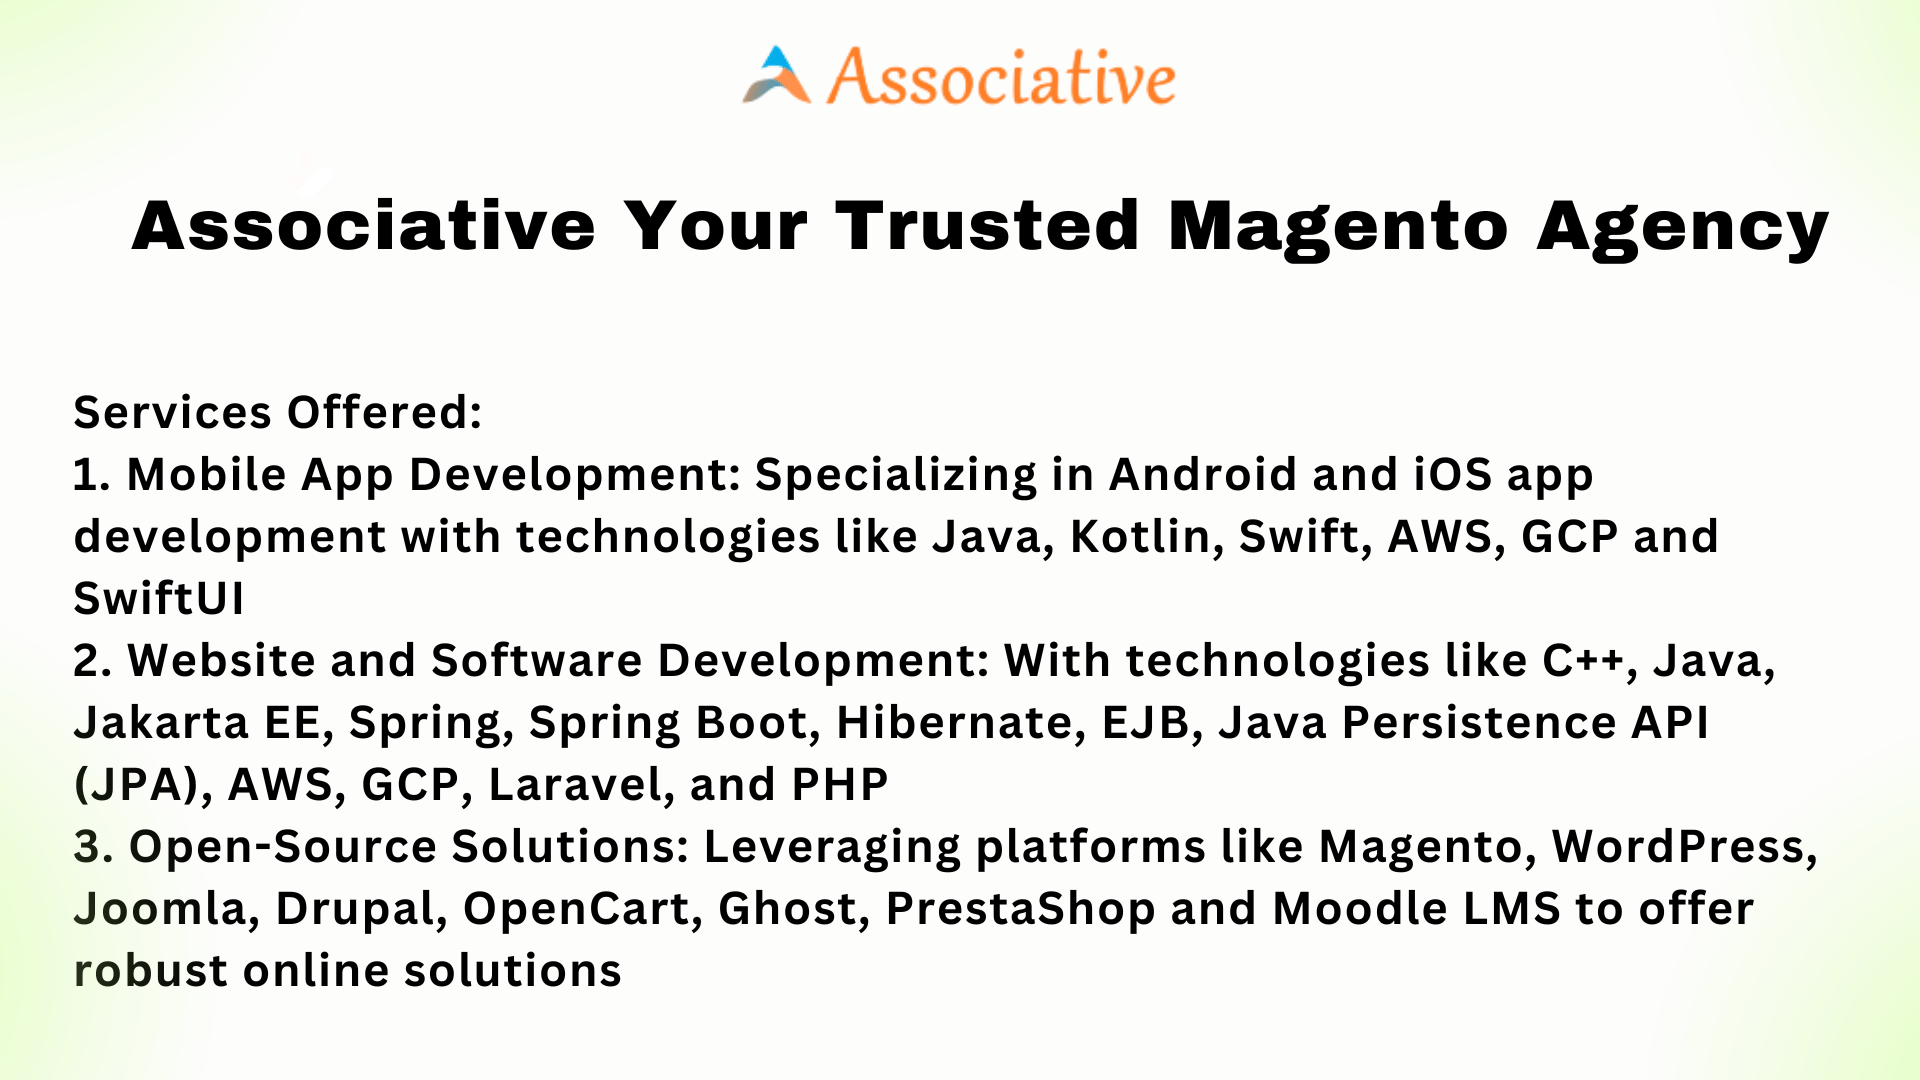 Associative Your Trusted Magento Agency